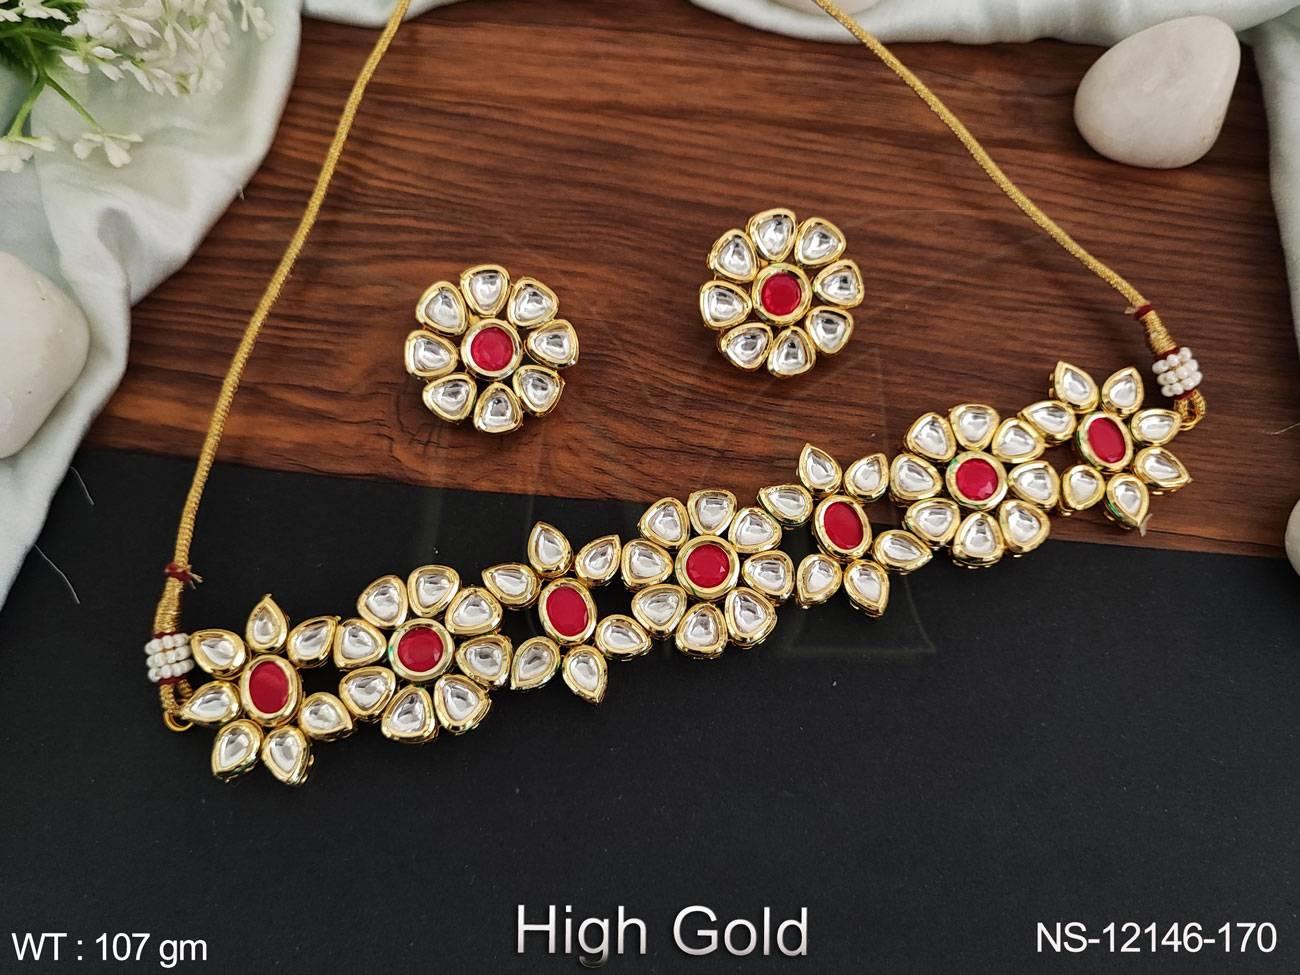 This choker style necklace set features intricate fancy designs and stunning Kundan stones to add a touch of elegance to any outfit.